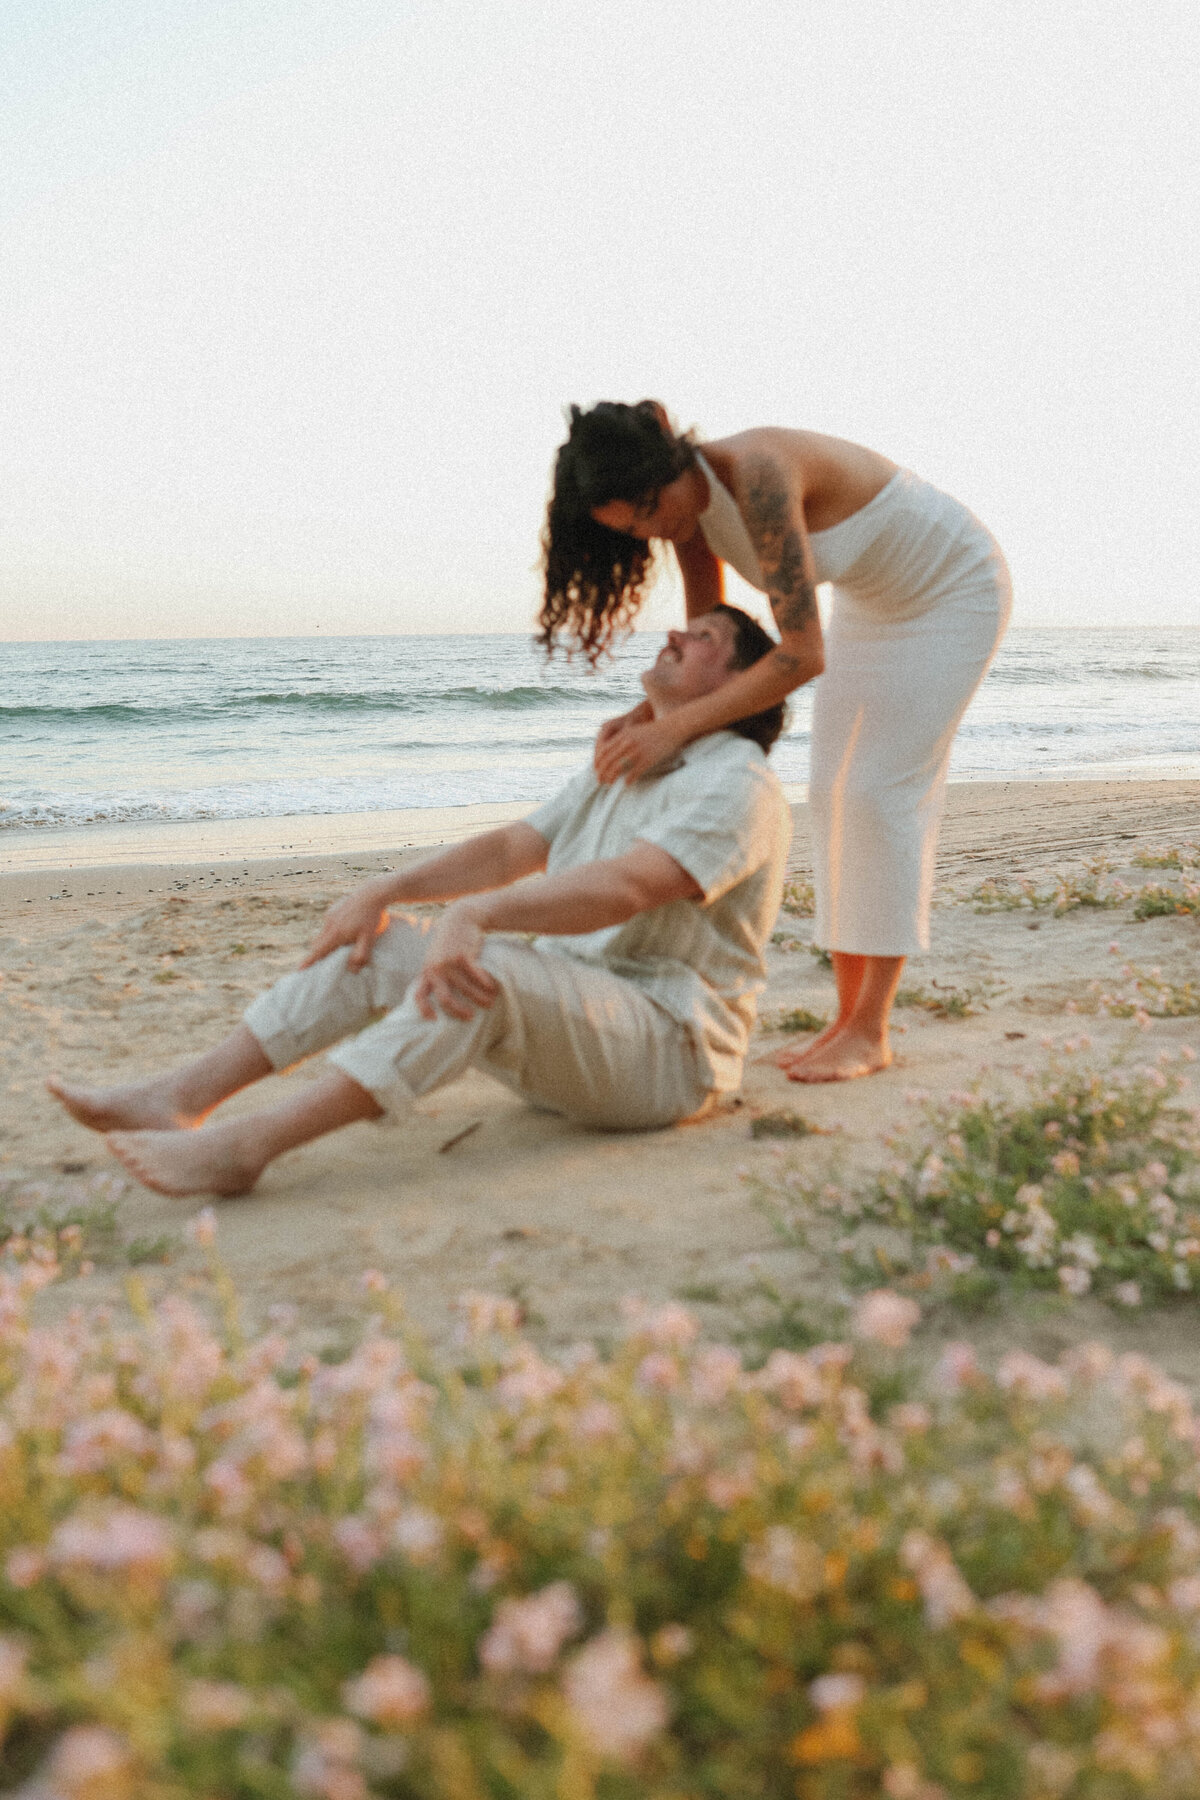 man sitting on the beach while girlfriend leans over him and kisses him with the ocean in the back round